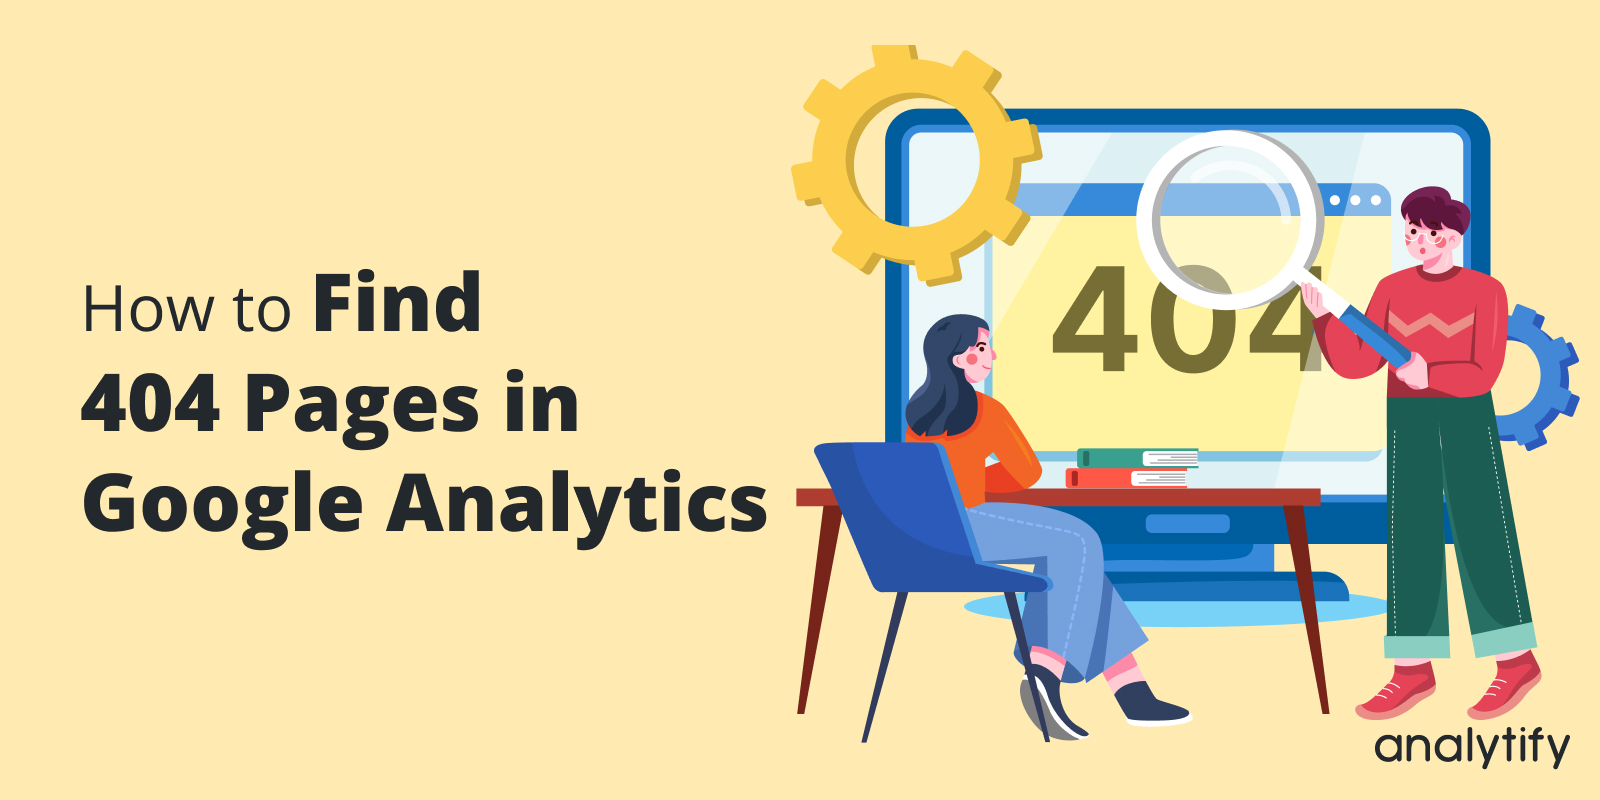 How to Find 404 Pages in Google Analytics